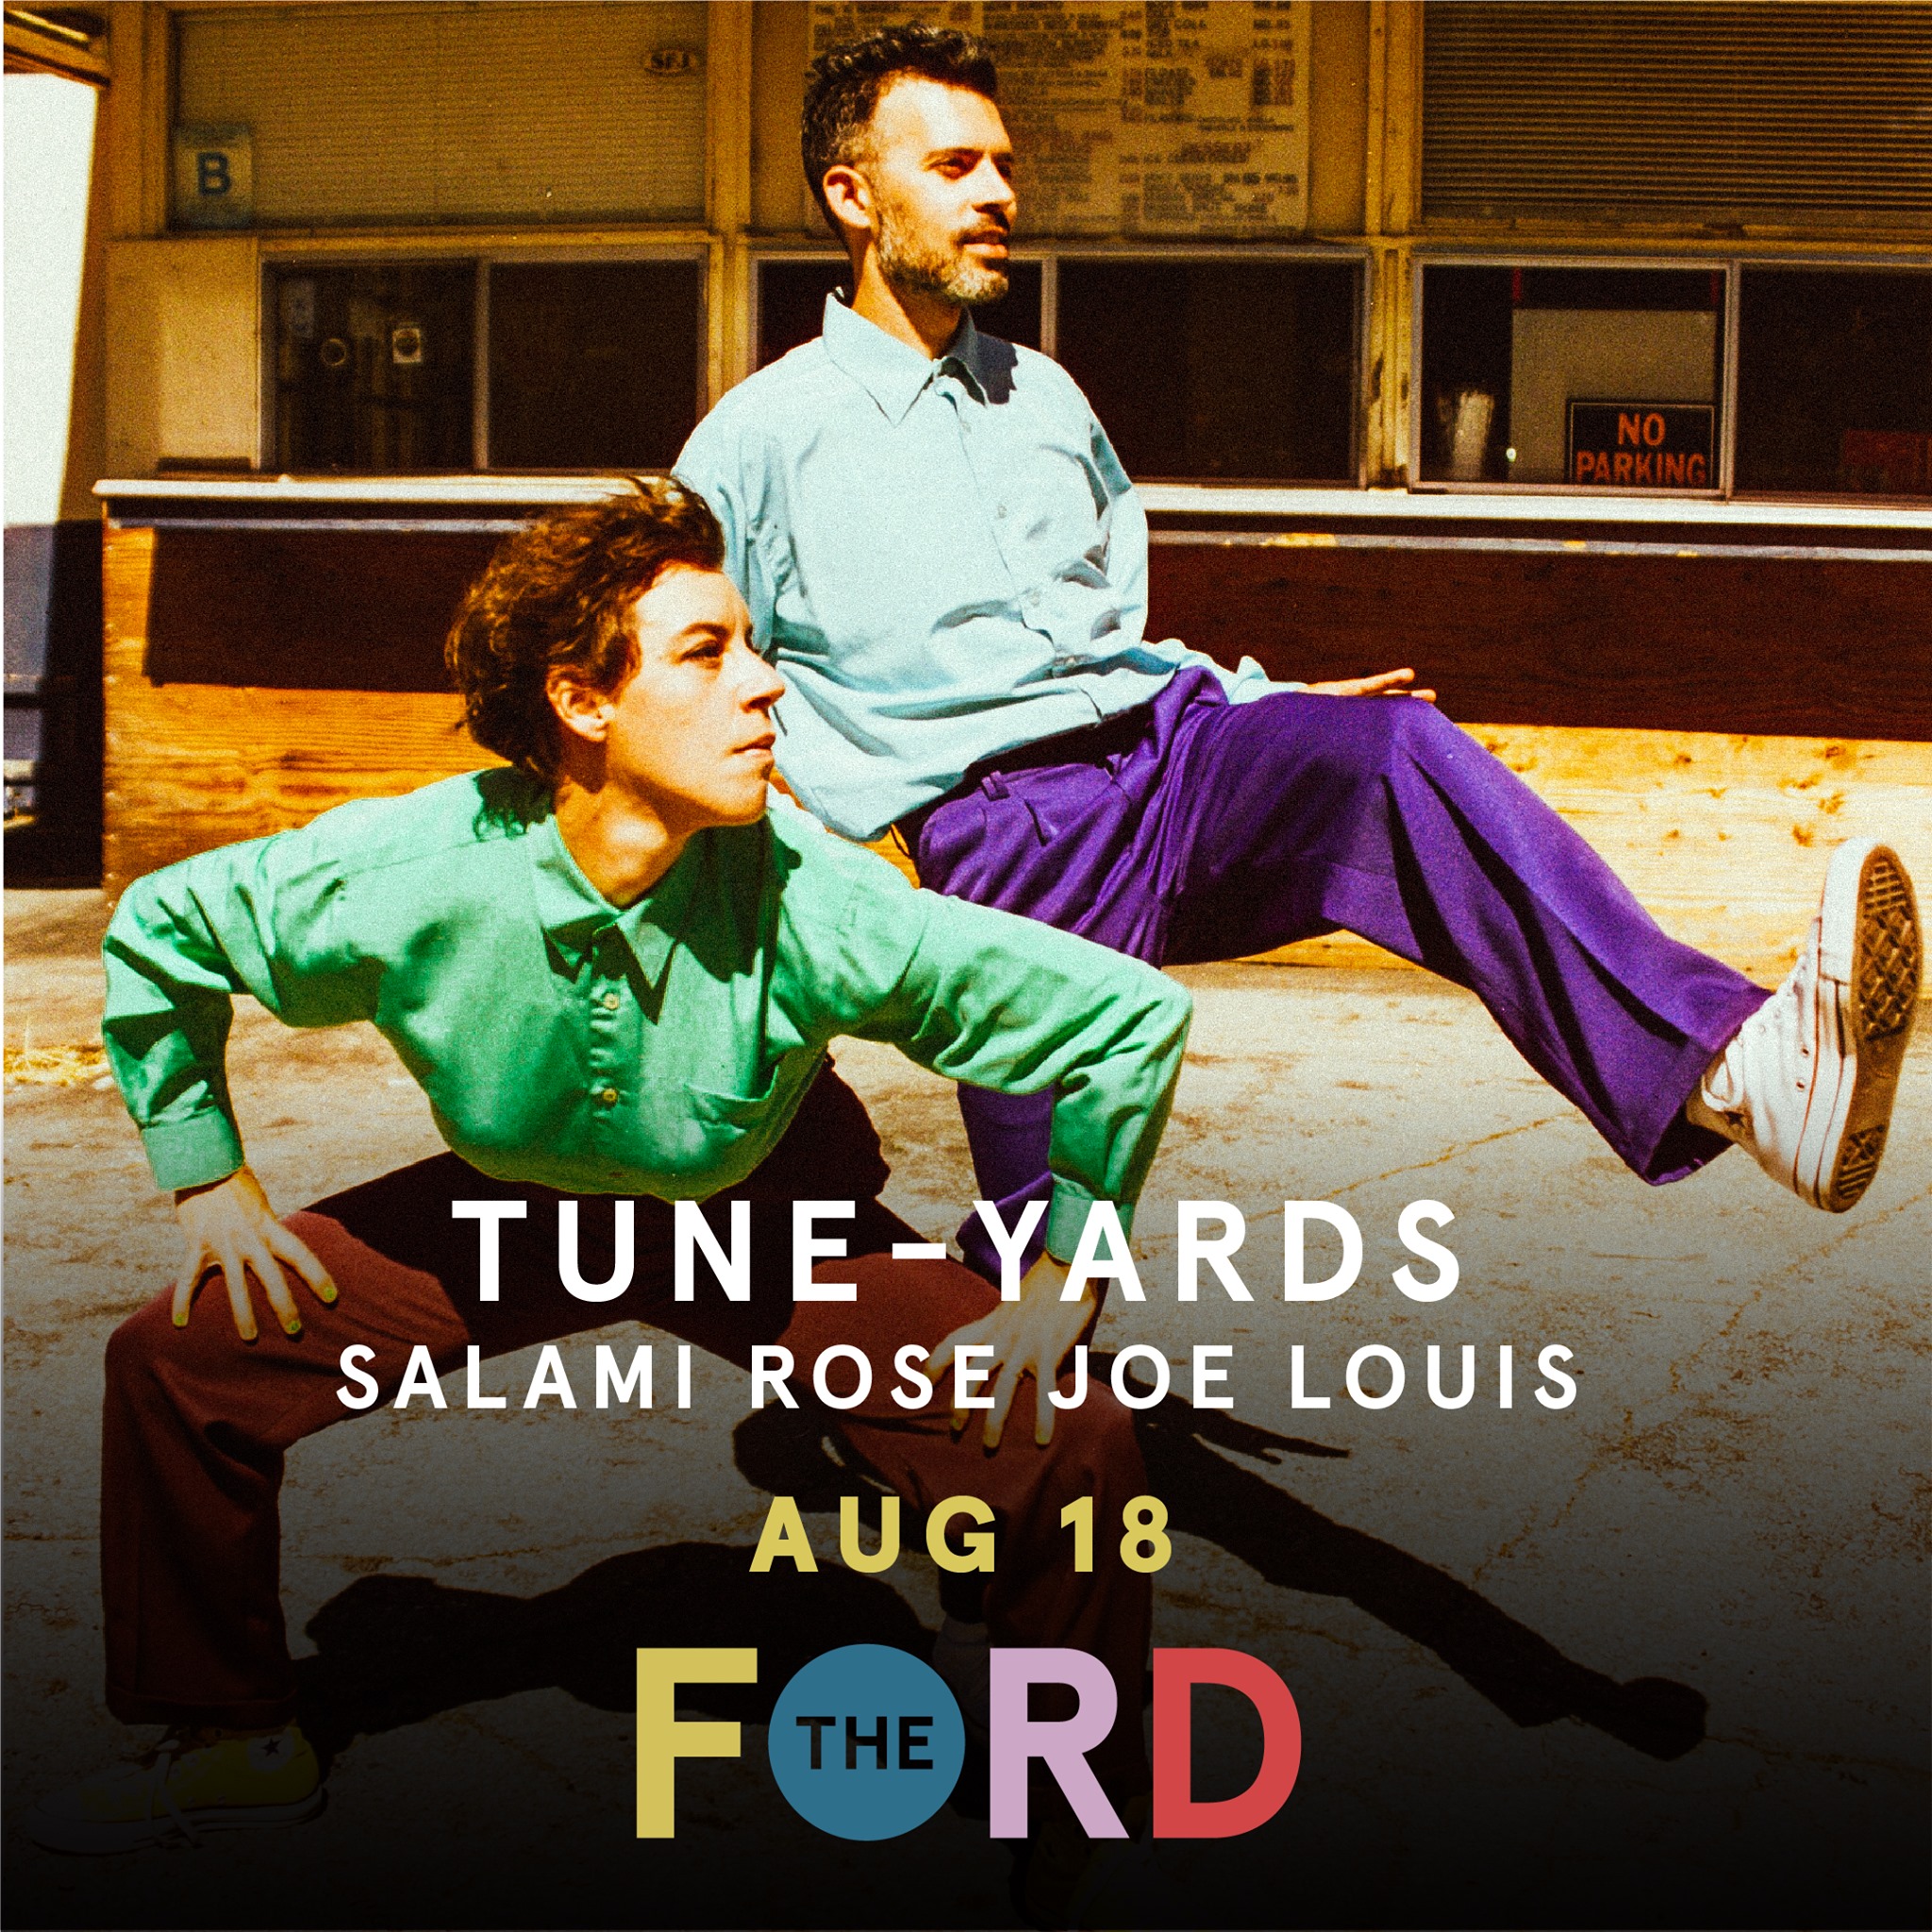 Tune Yards with Salami Rose Joe Louis at The Ford on Wed, Aug 20th ...